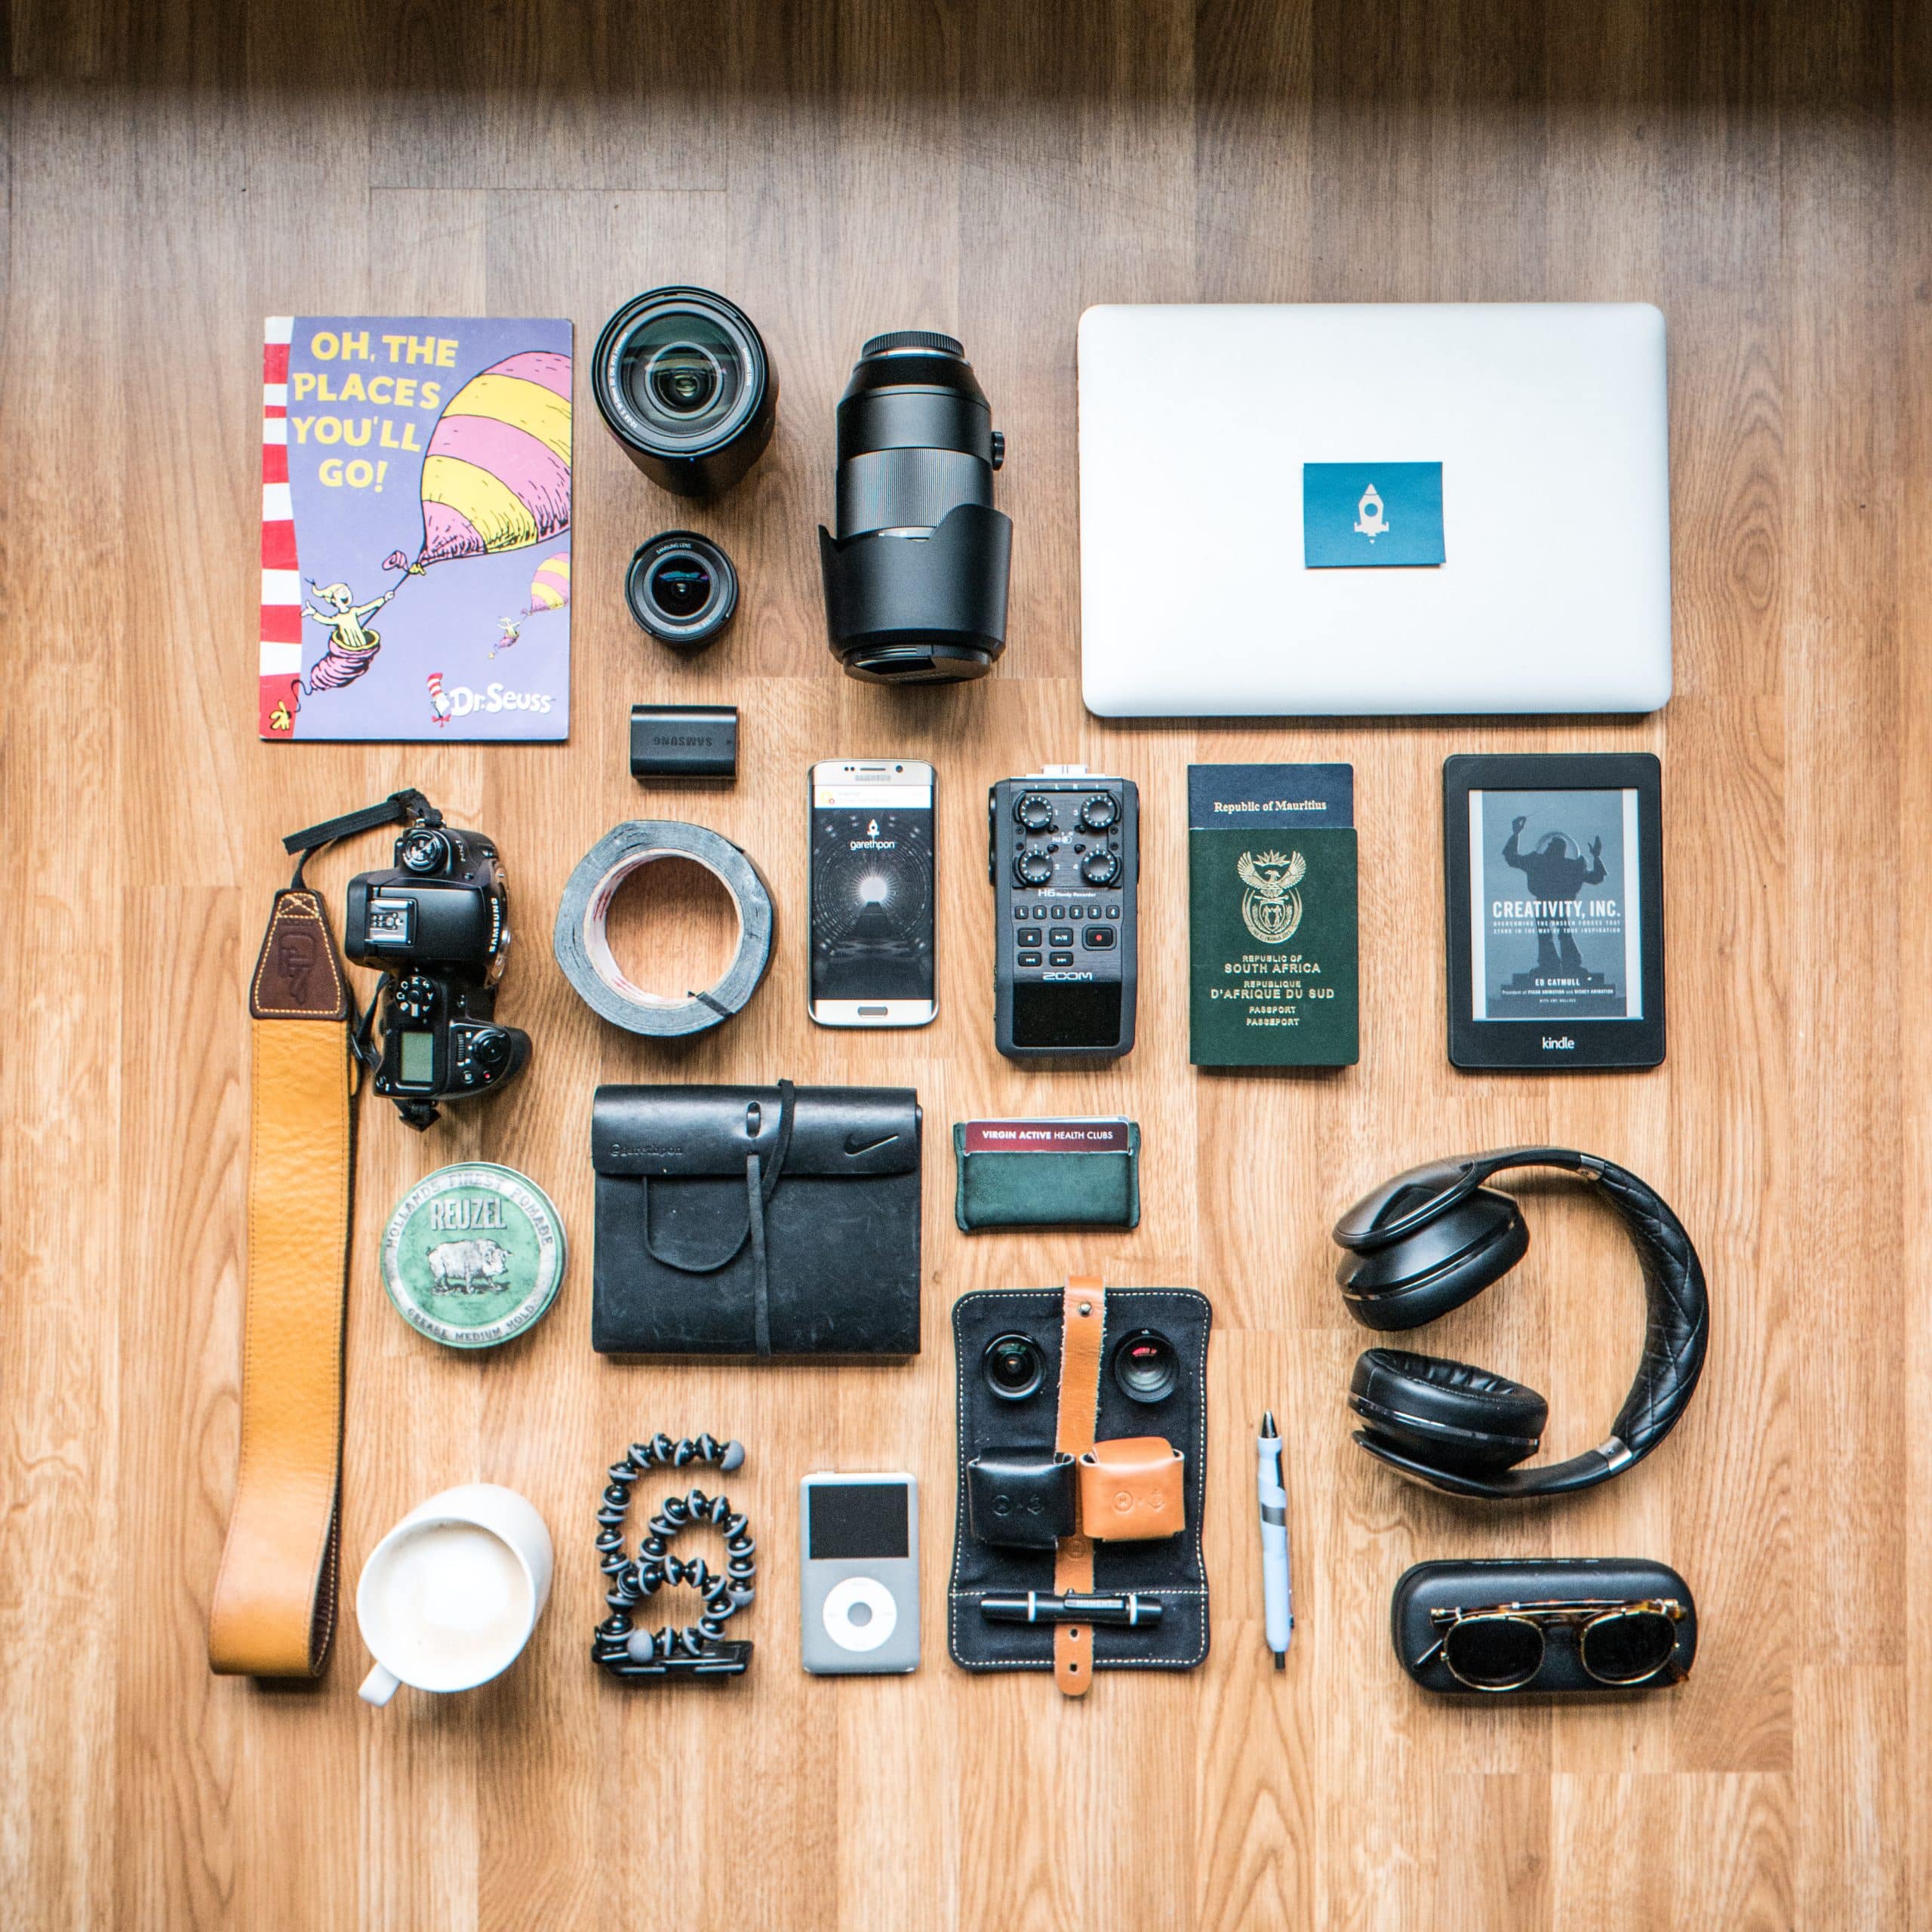 Gareth Pon’s Photo Toolkit: See what the insta-famous photographer keeps on hand